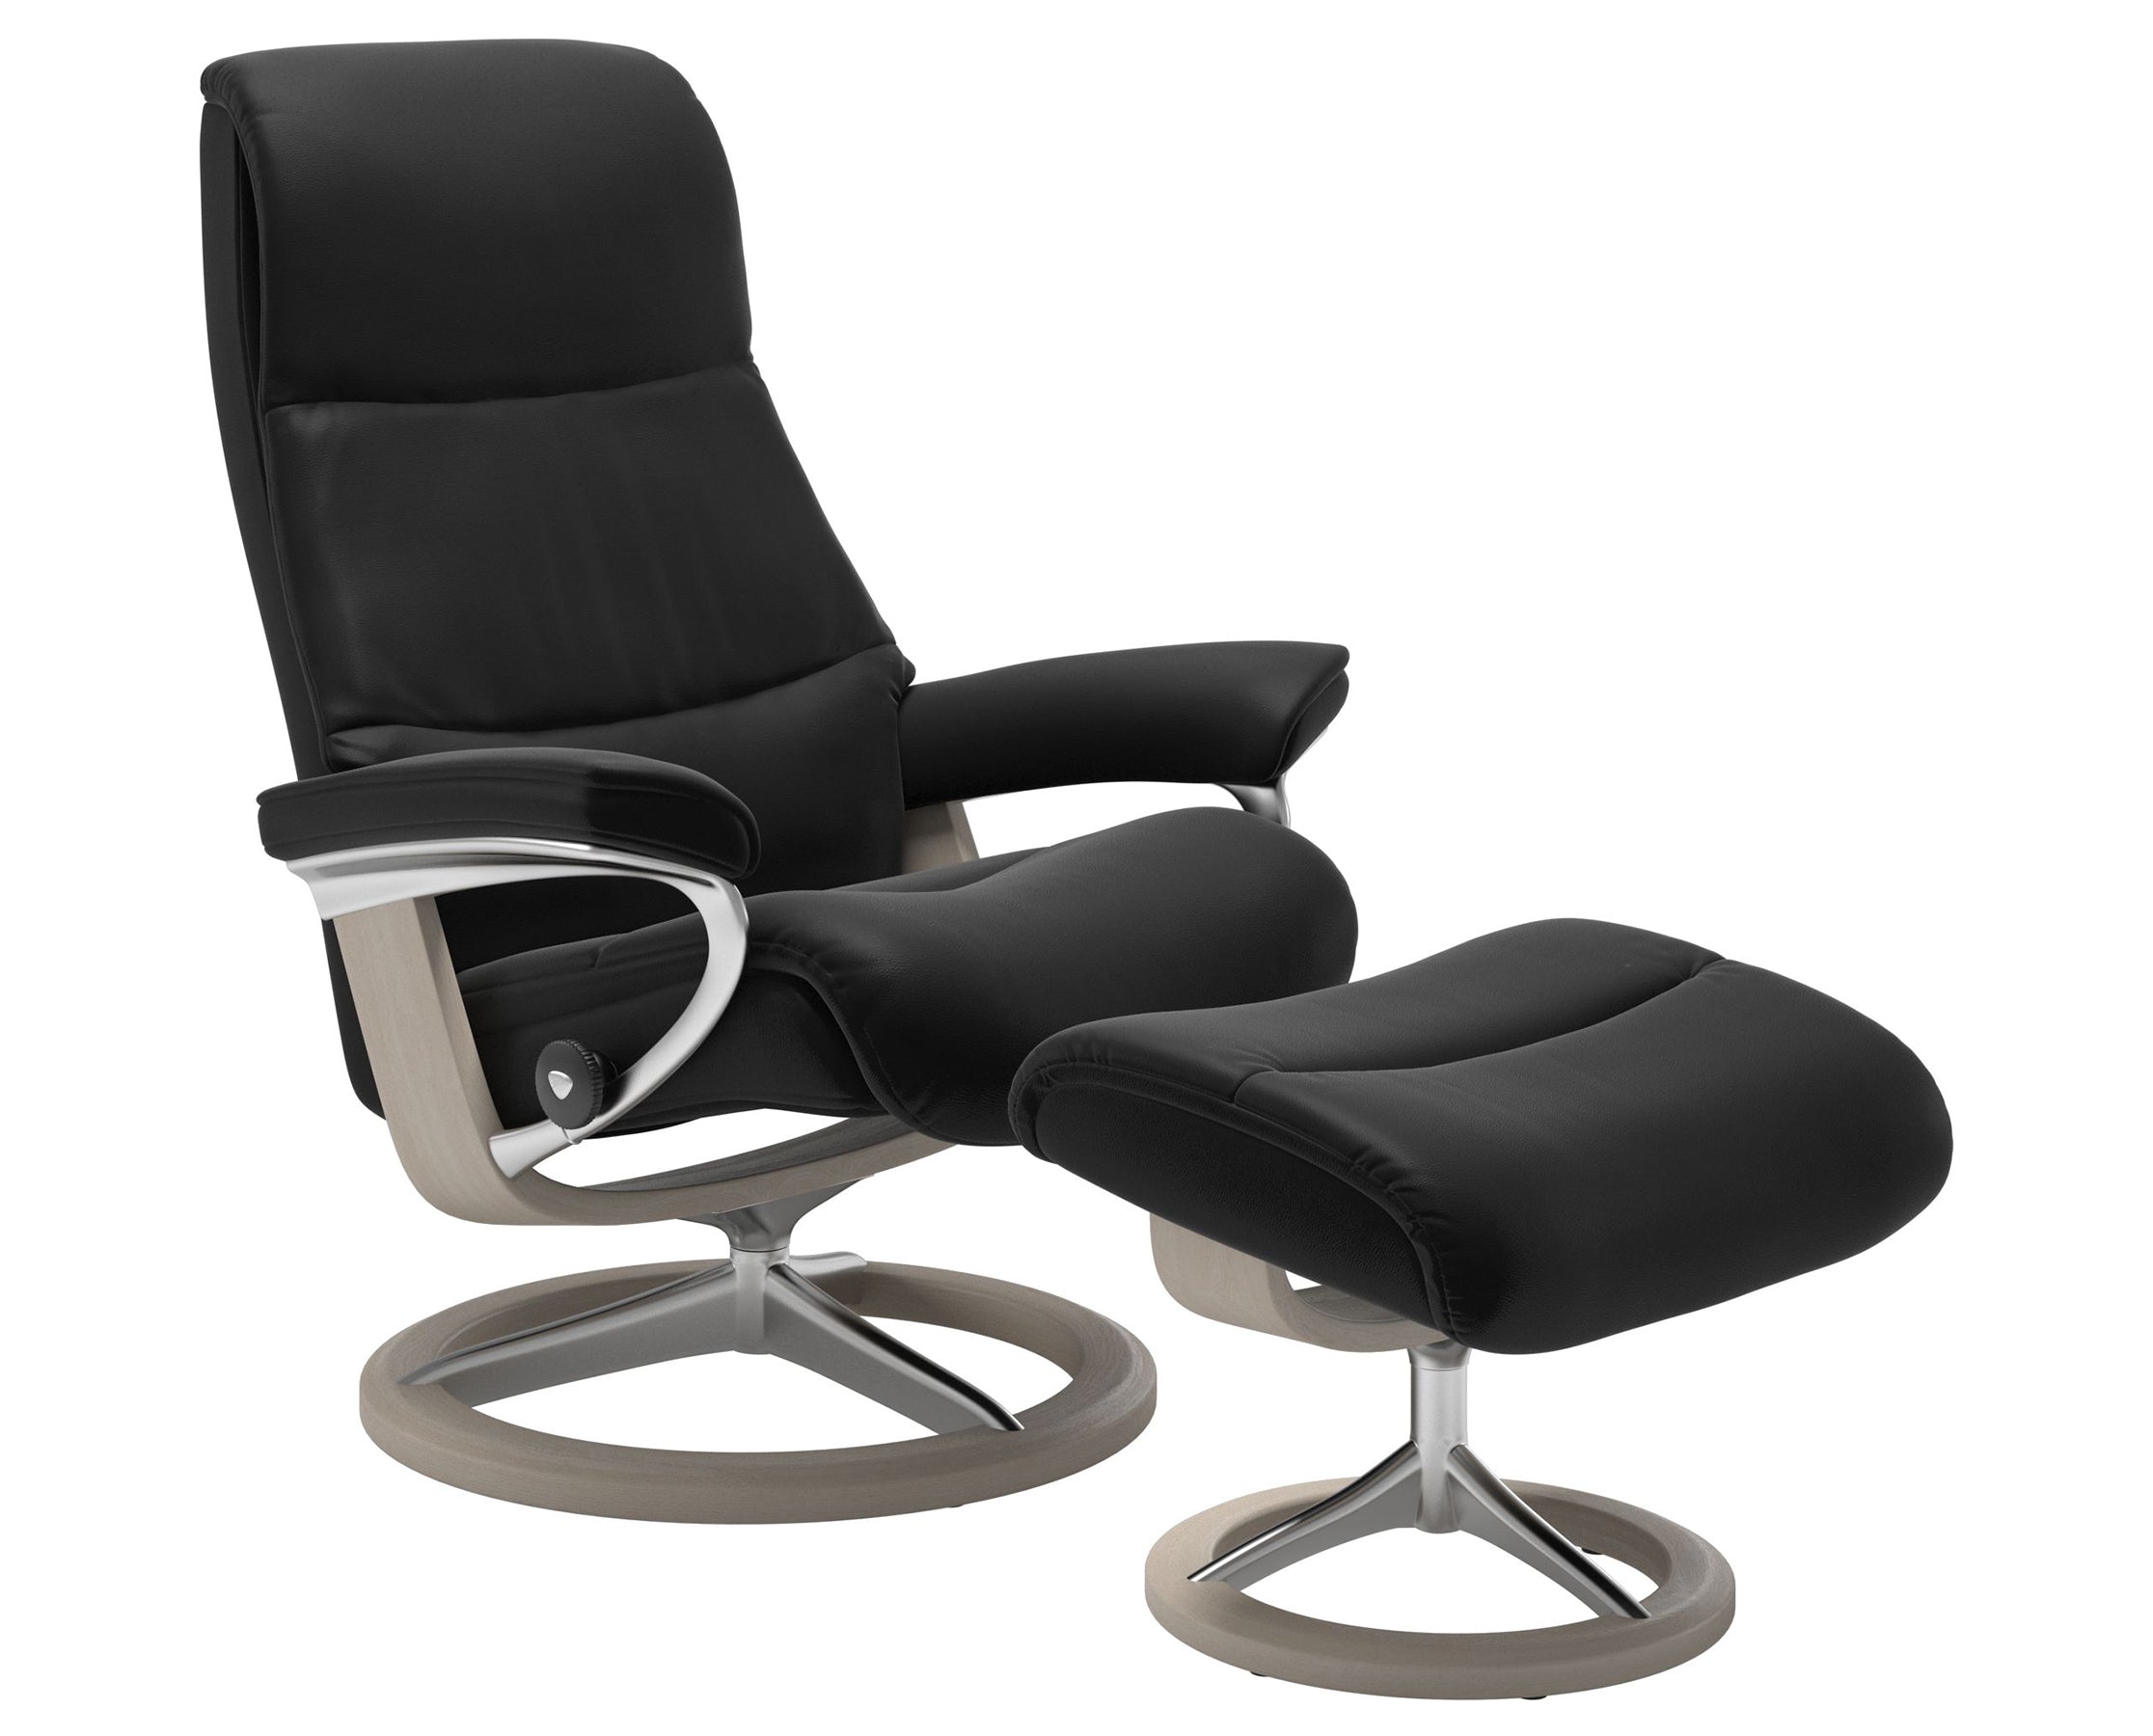 Paloma Leather Black S/M/L and Whitewash Base | Stressless View Signature Recliner | Valley Ridge Furniture